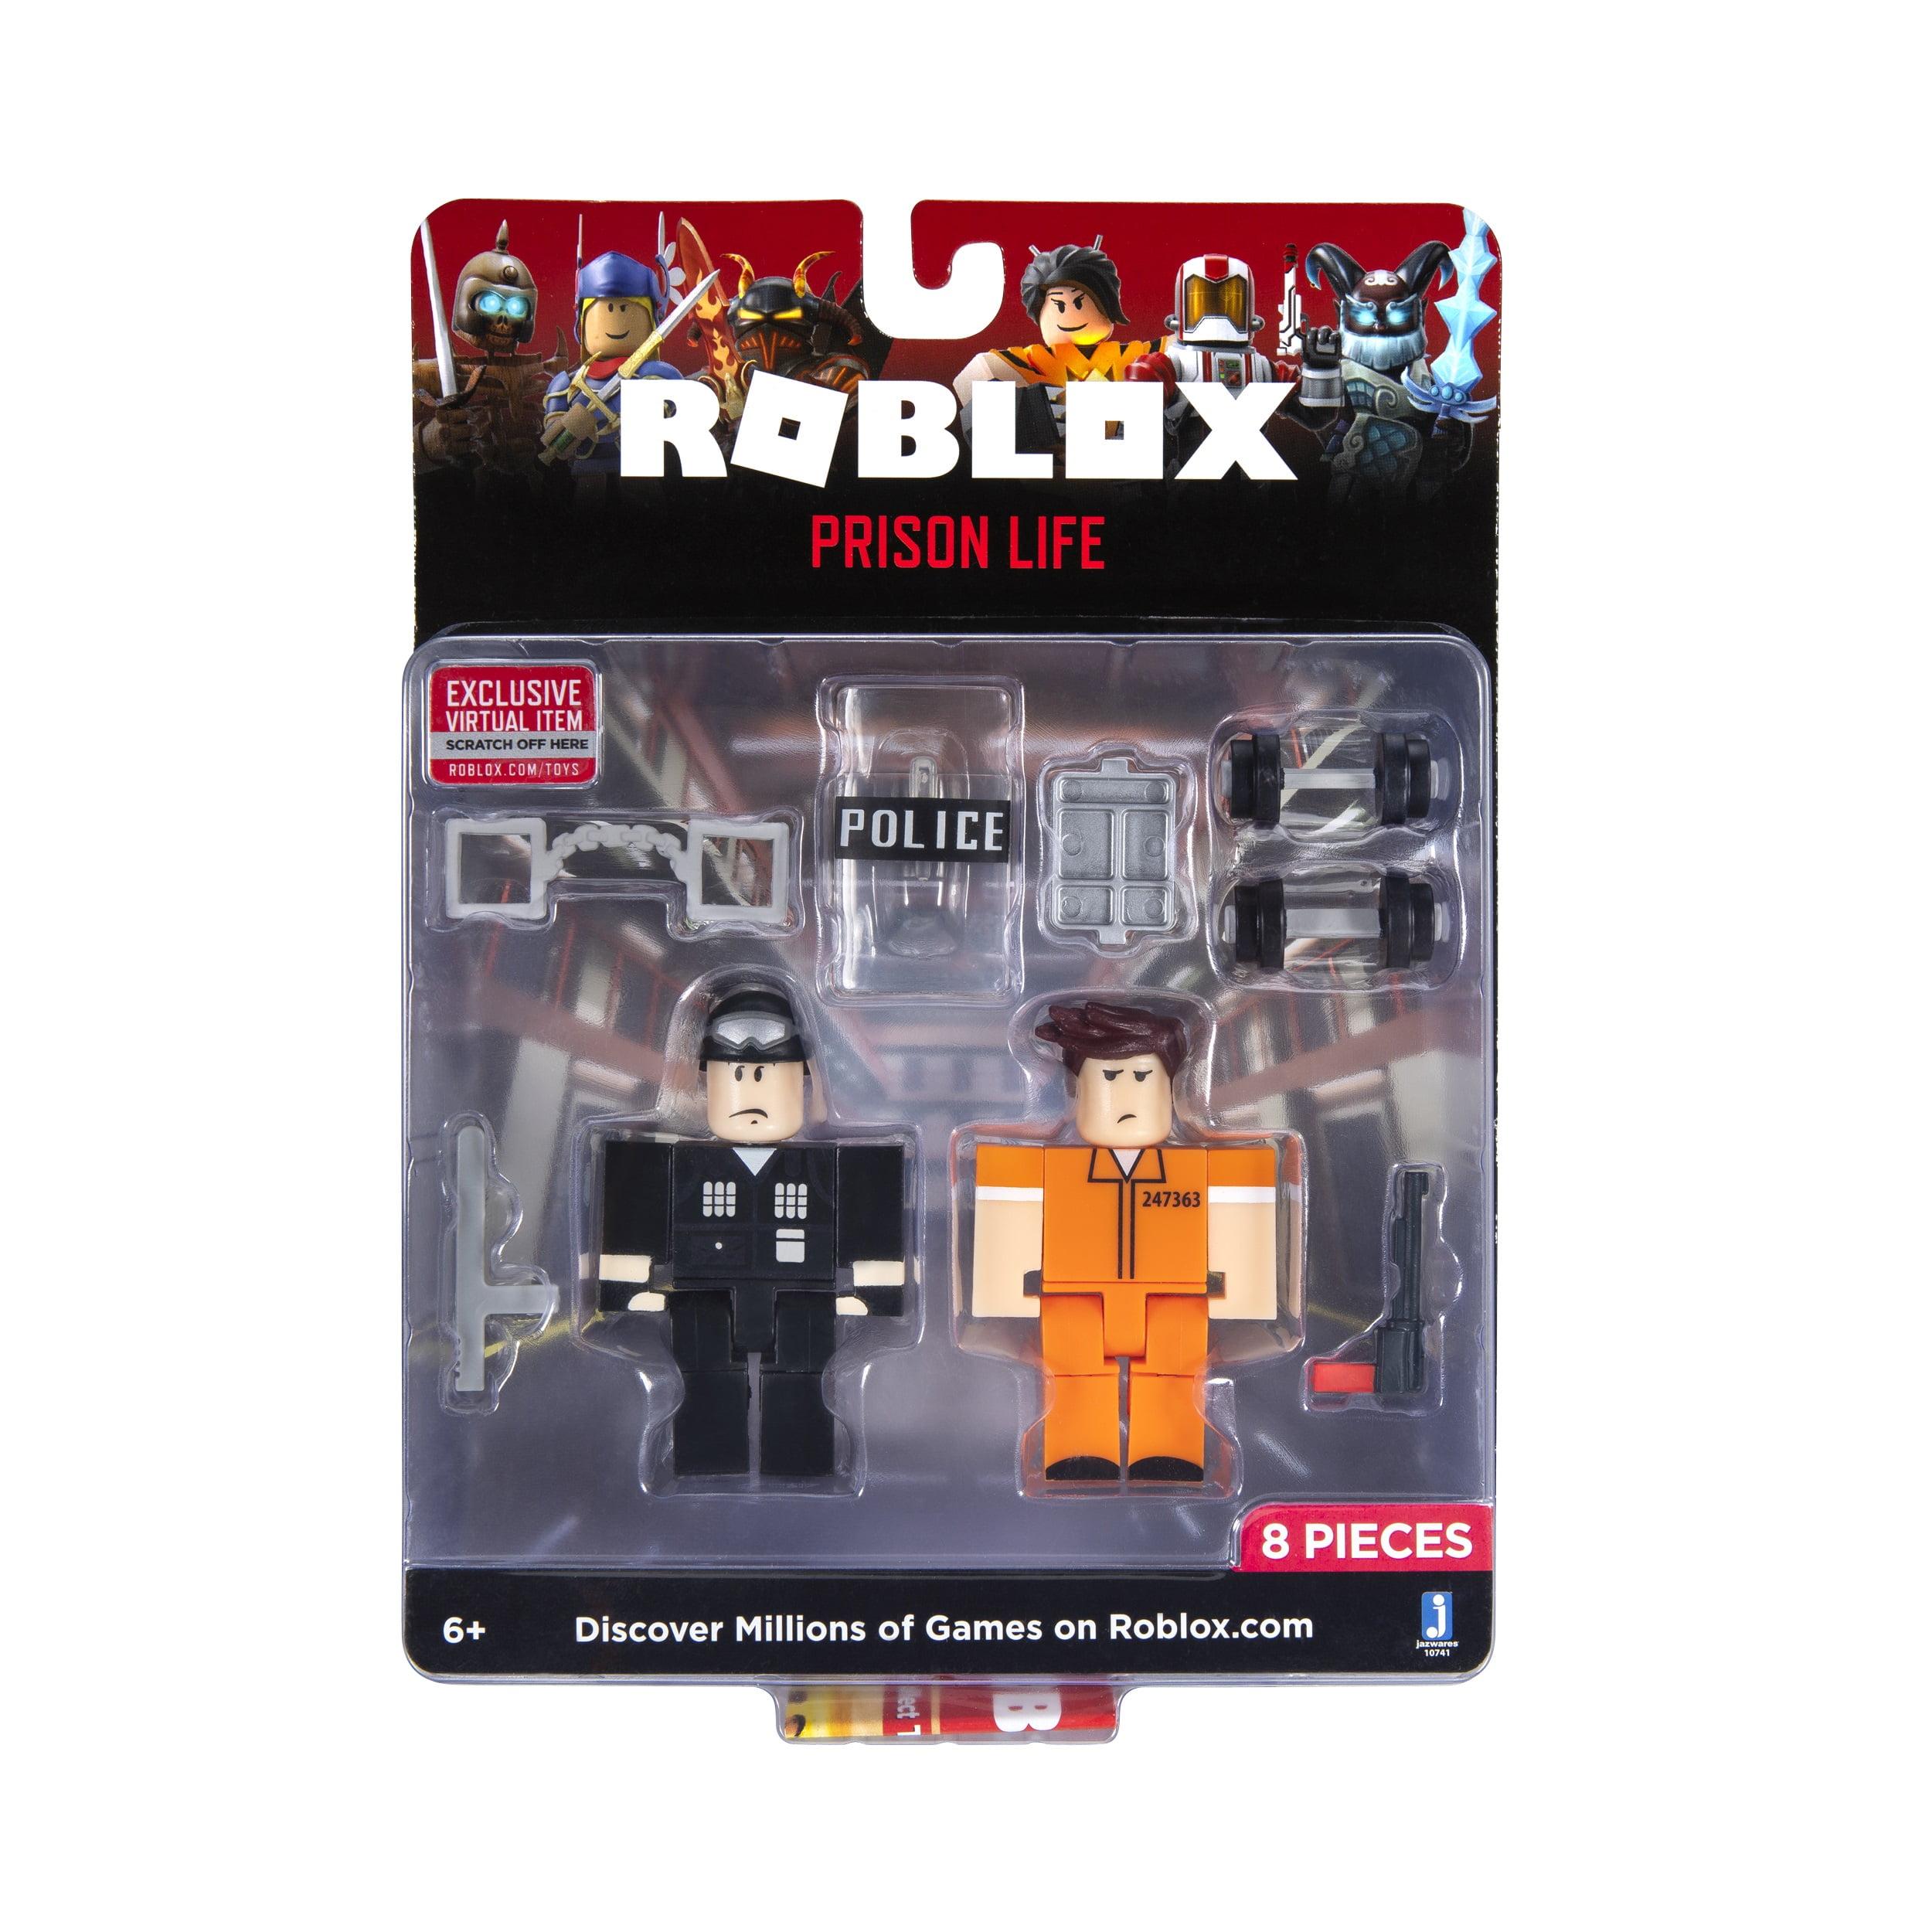 Roblox Action Collection Prison Life Game Pack Includes Exclusive Virtual Item Walmart Com Walmart Com - roblox toys prison life